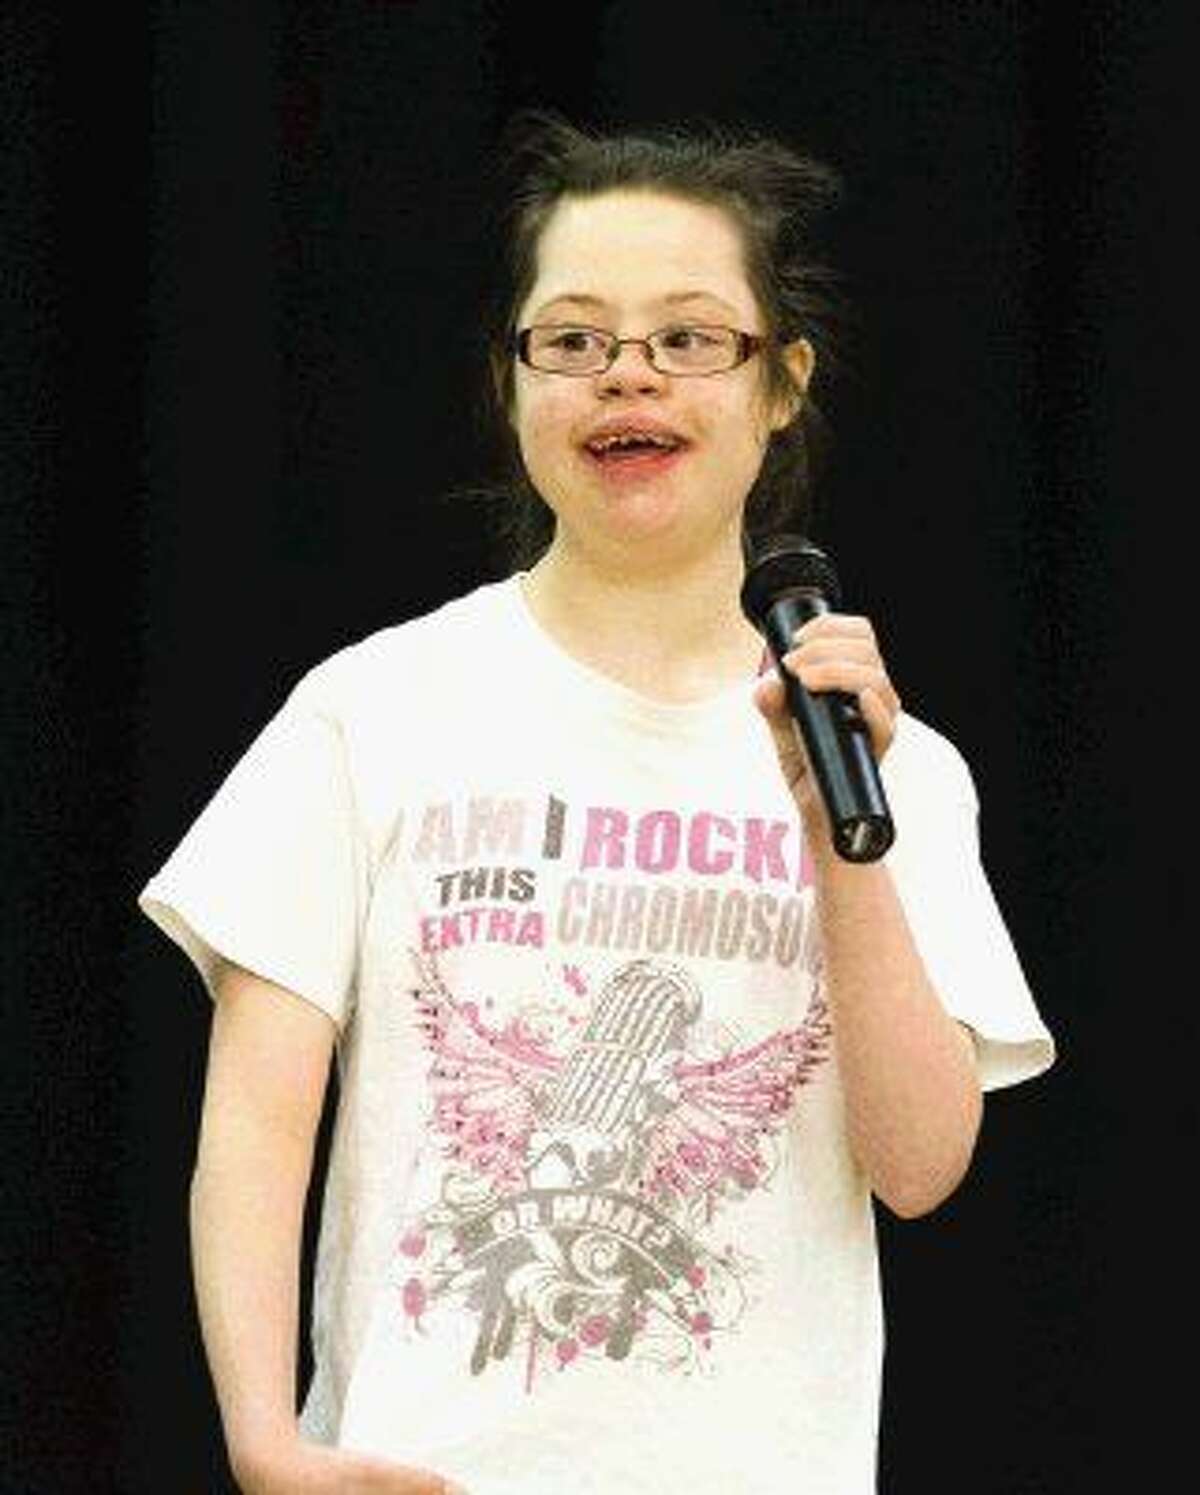 Alyssa Begley sings a cover of “Another Brick in the Wall” by Korn during a rehearsal Thursday for Saturday’s Talent and Variety Show at Montgomery Middle School.